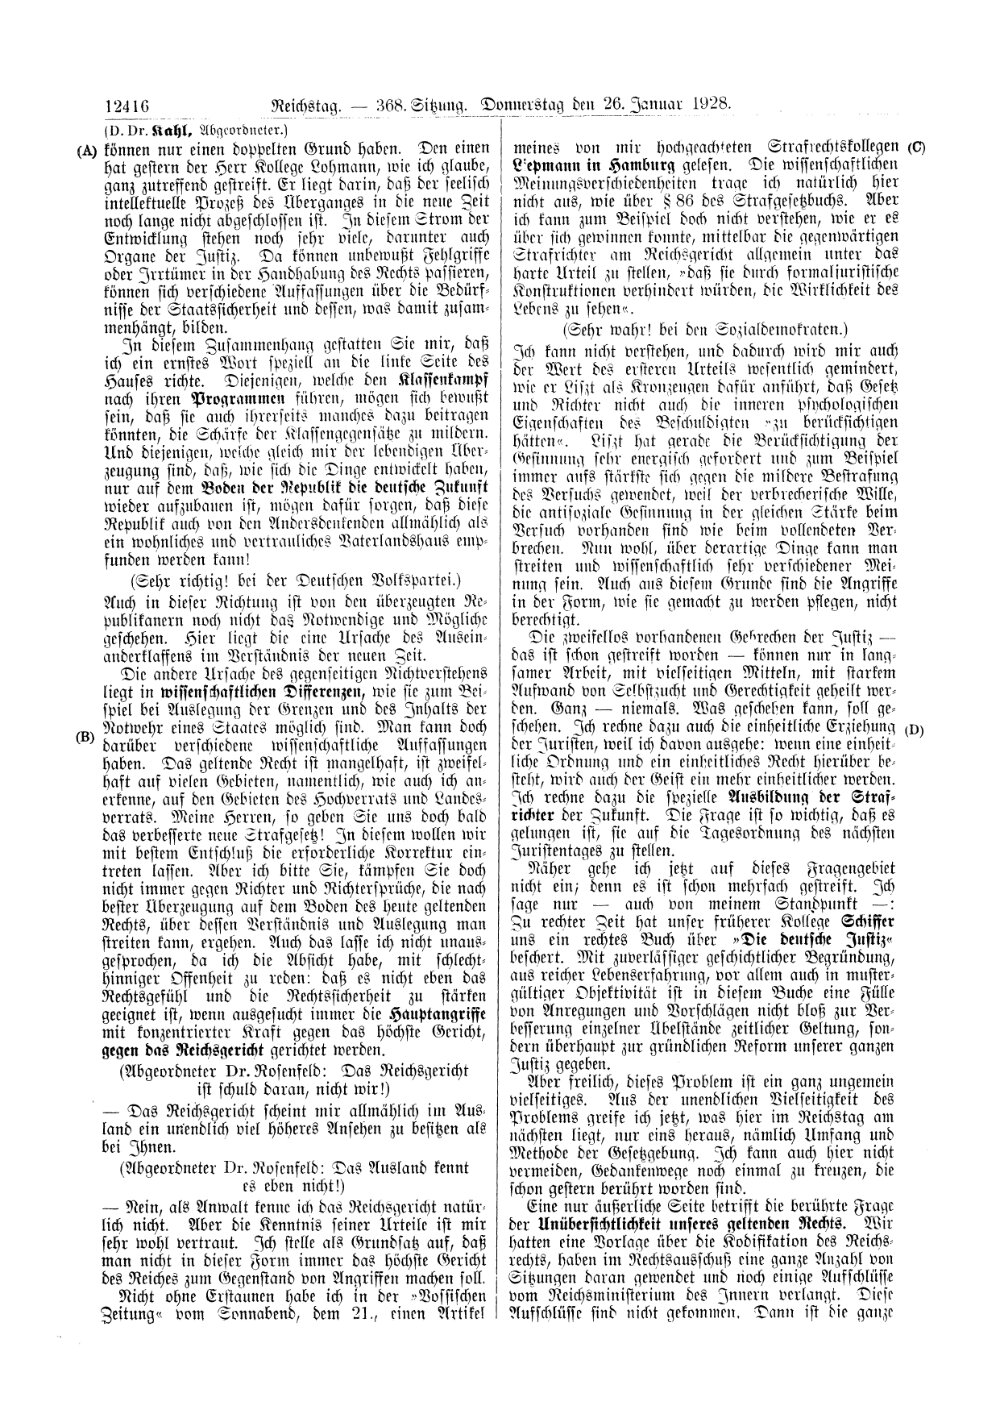 Scan of page 12416